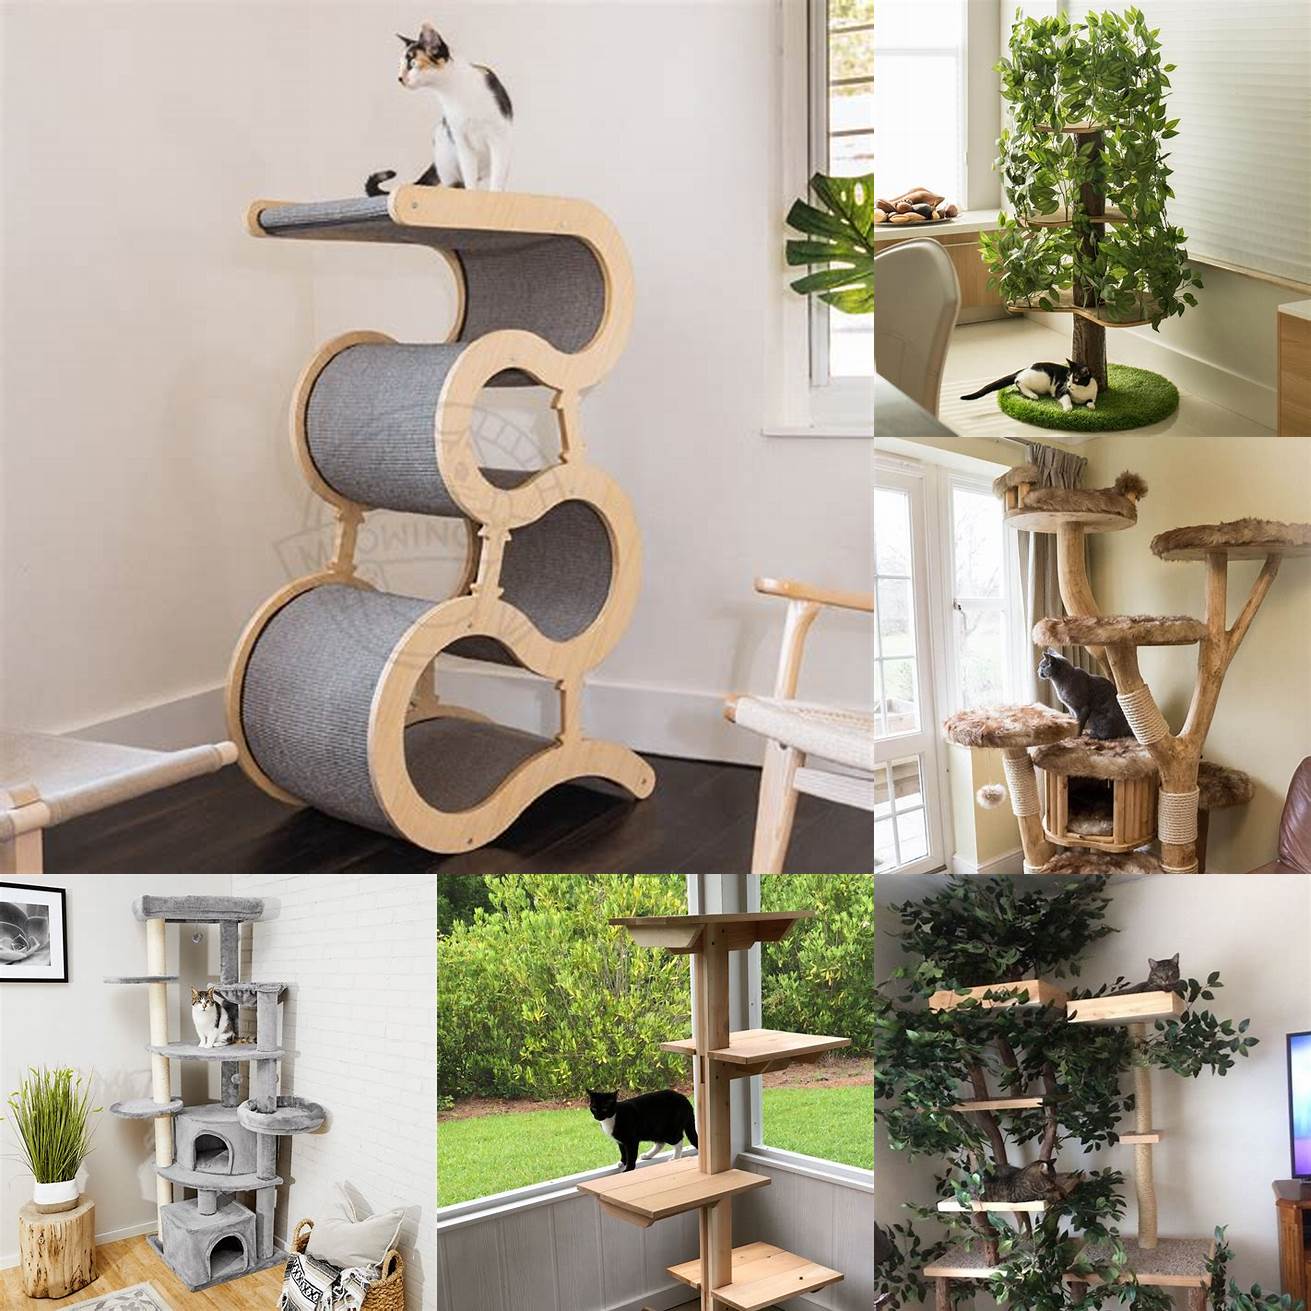 Provide plenty of hiding spots and escape routes for your cats such as cat trees or boxes This can help reduce stress and provide a safe space for your cats